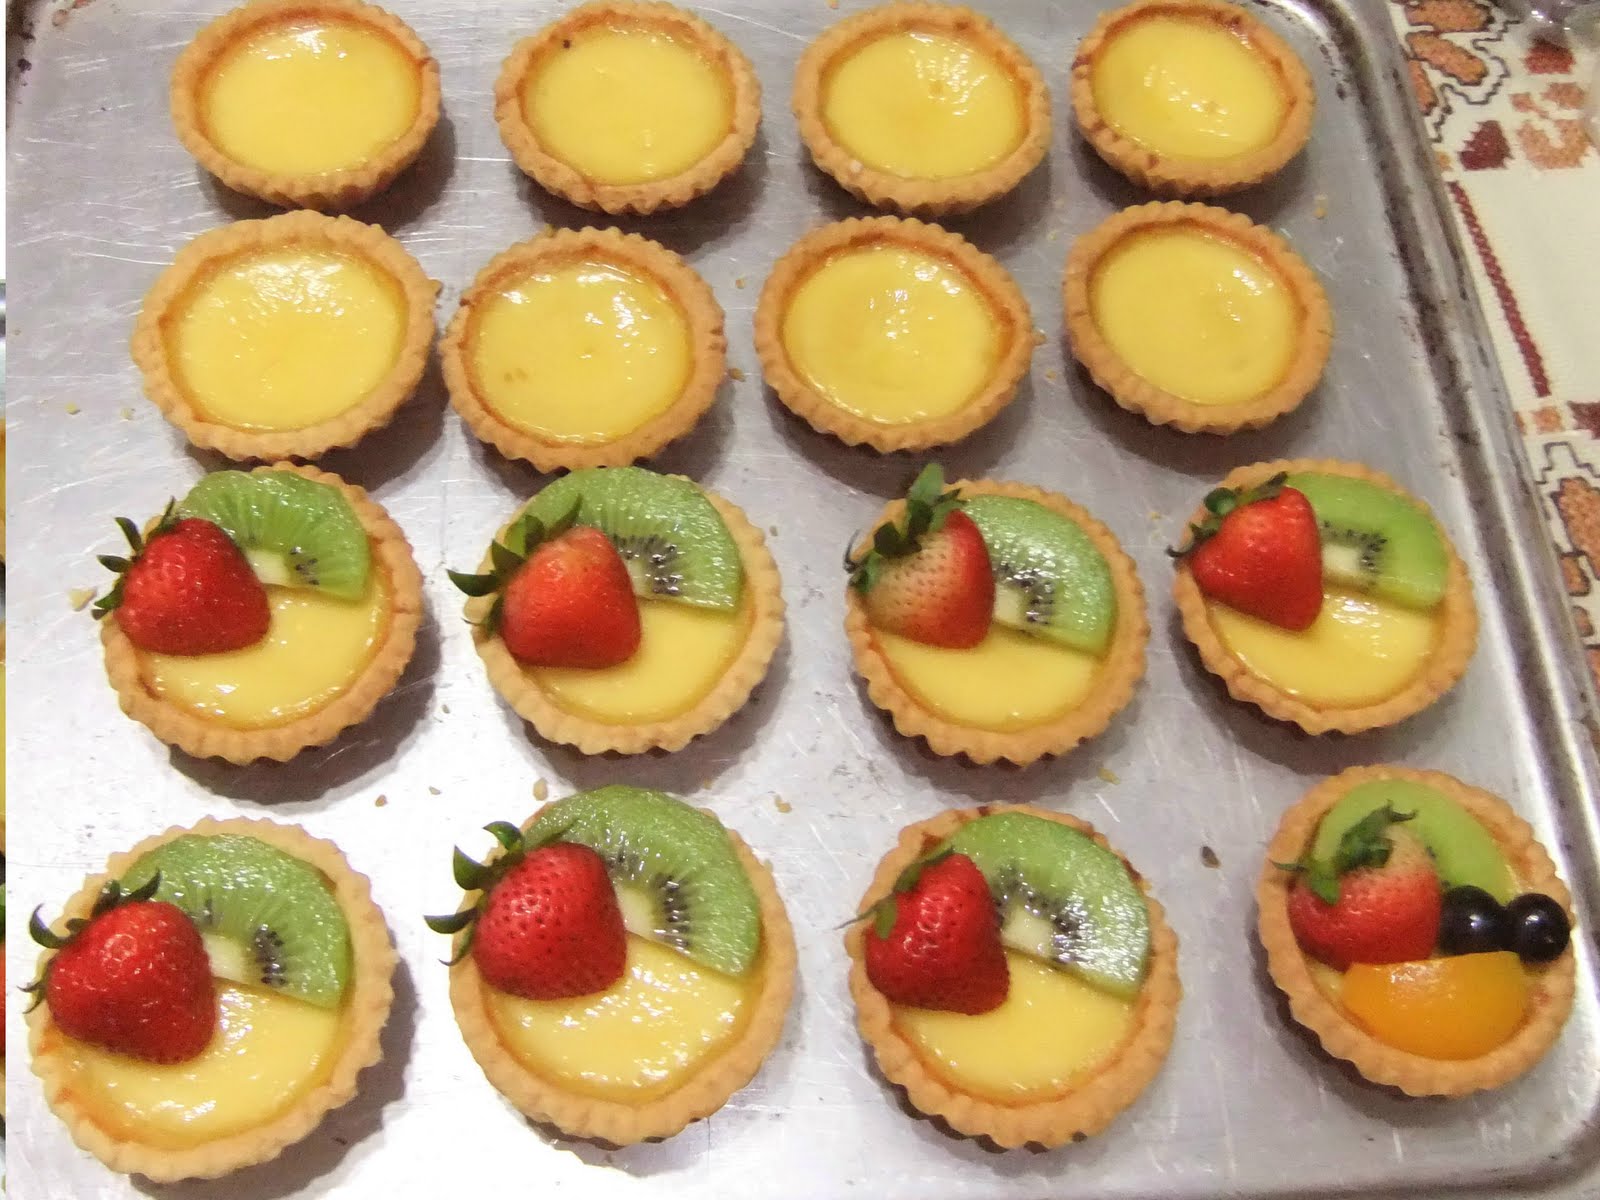 WELCOME TO RSR: FRUITY EGG TART